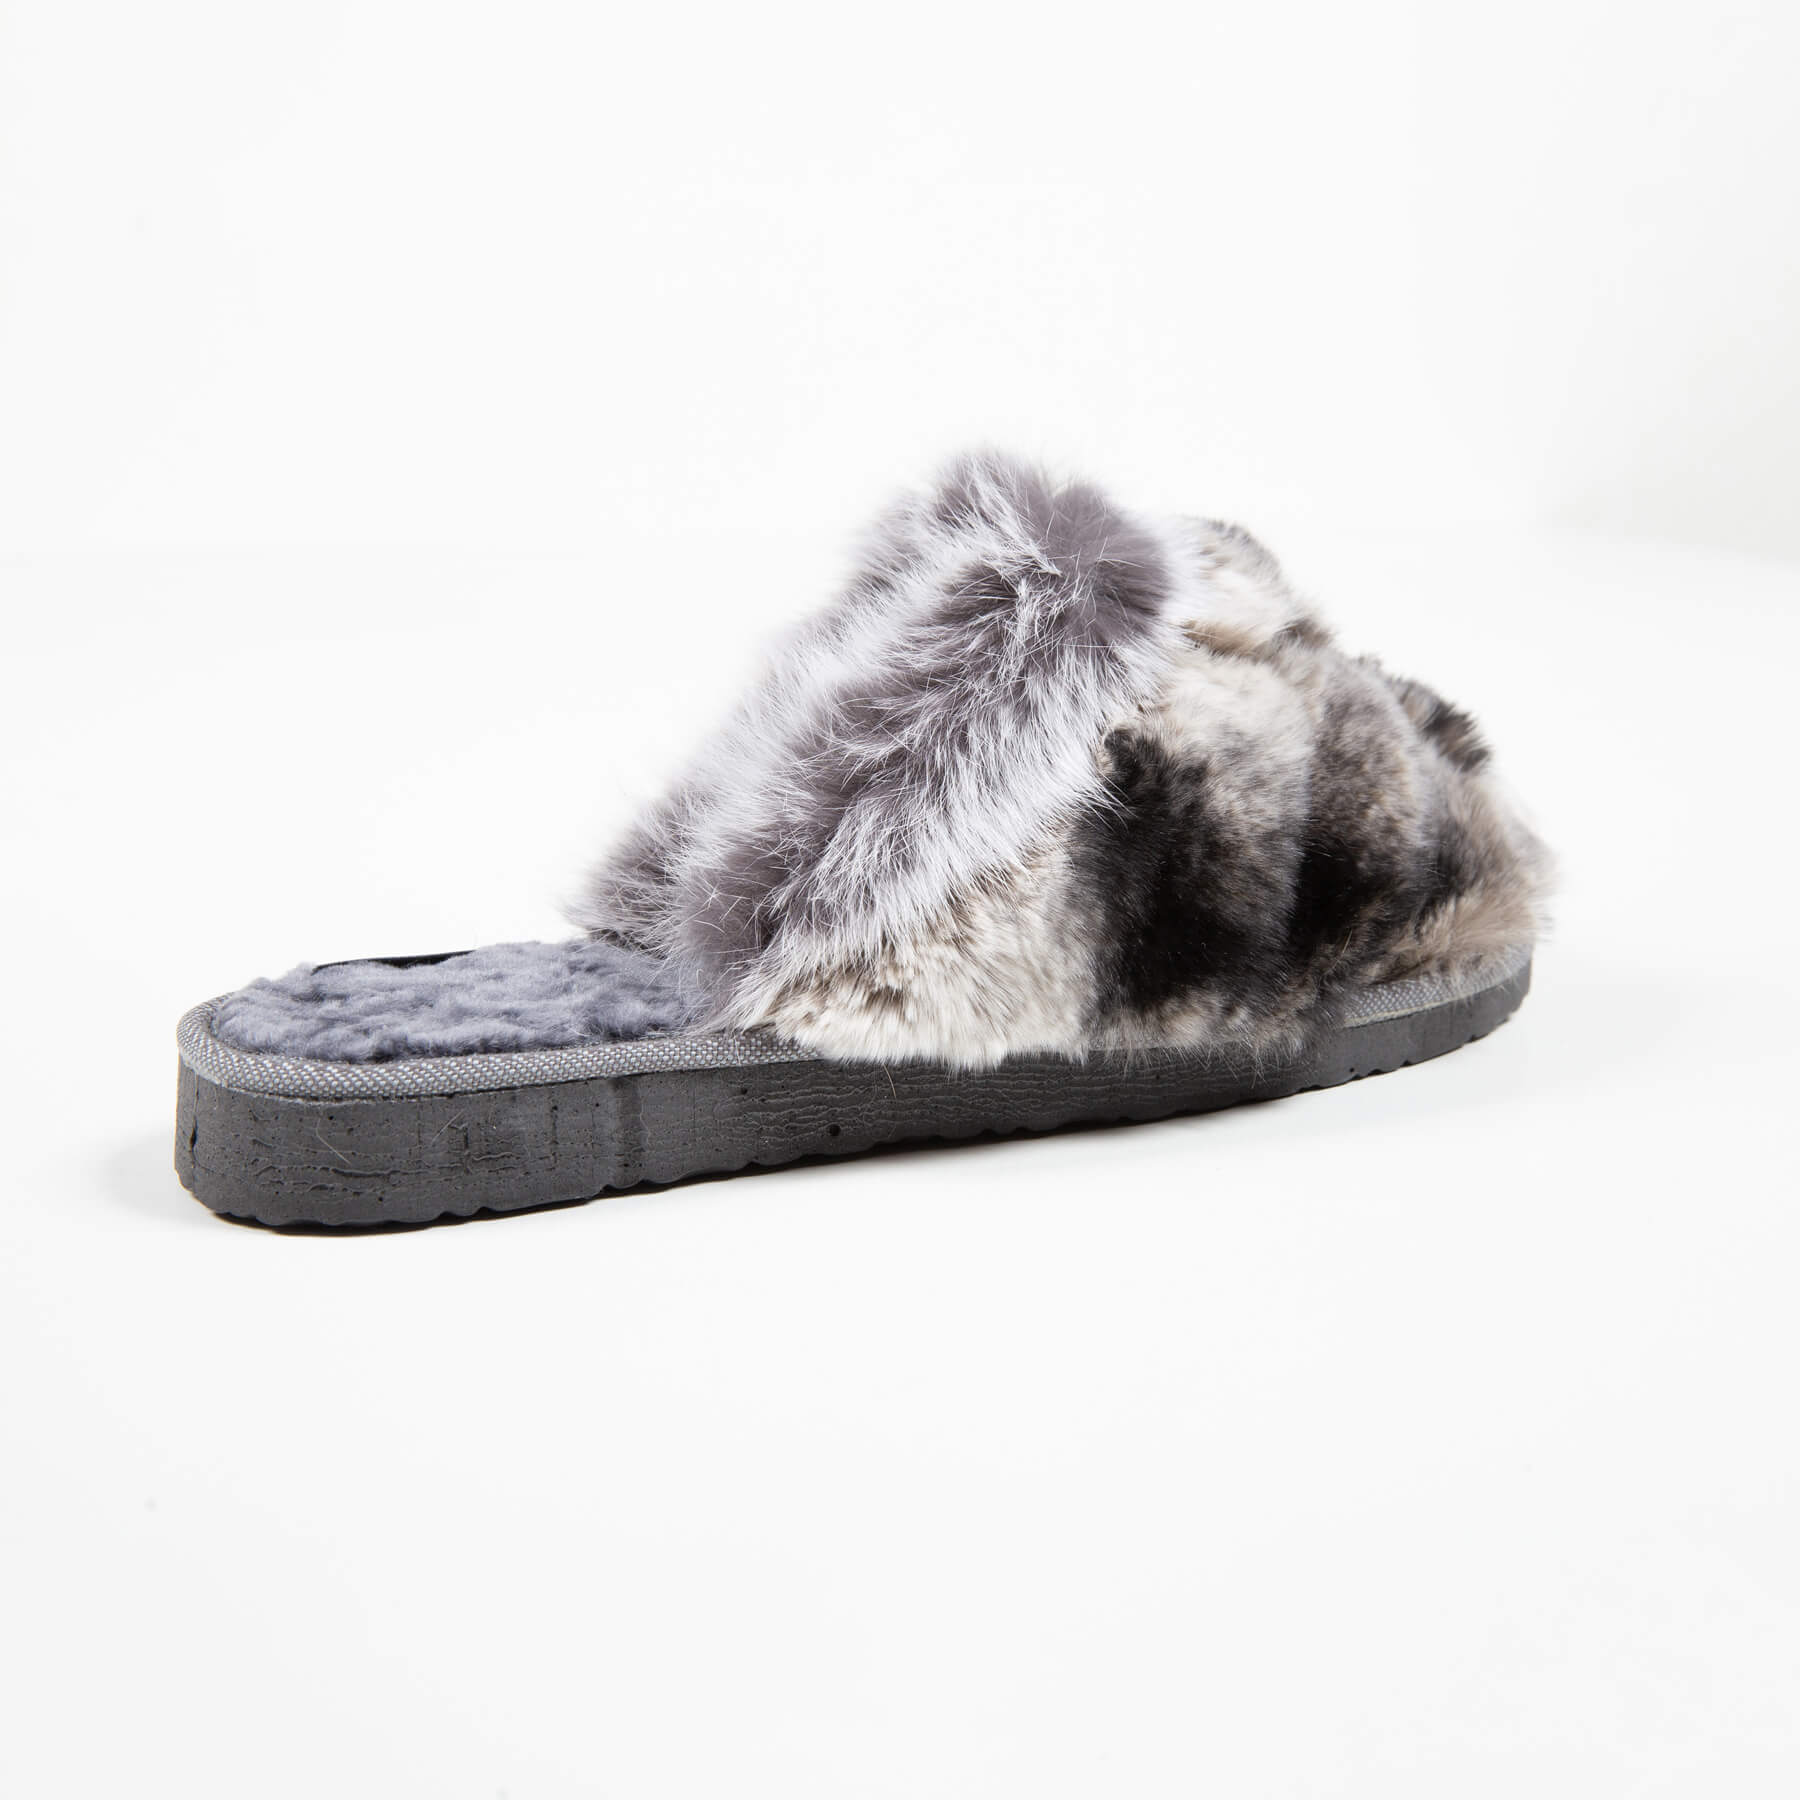 snow river slippers